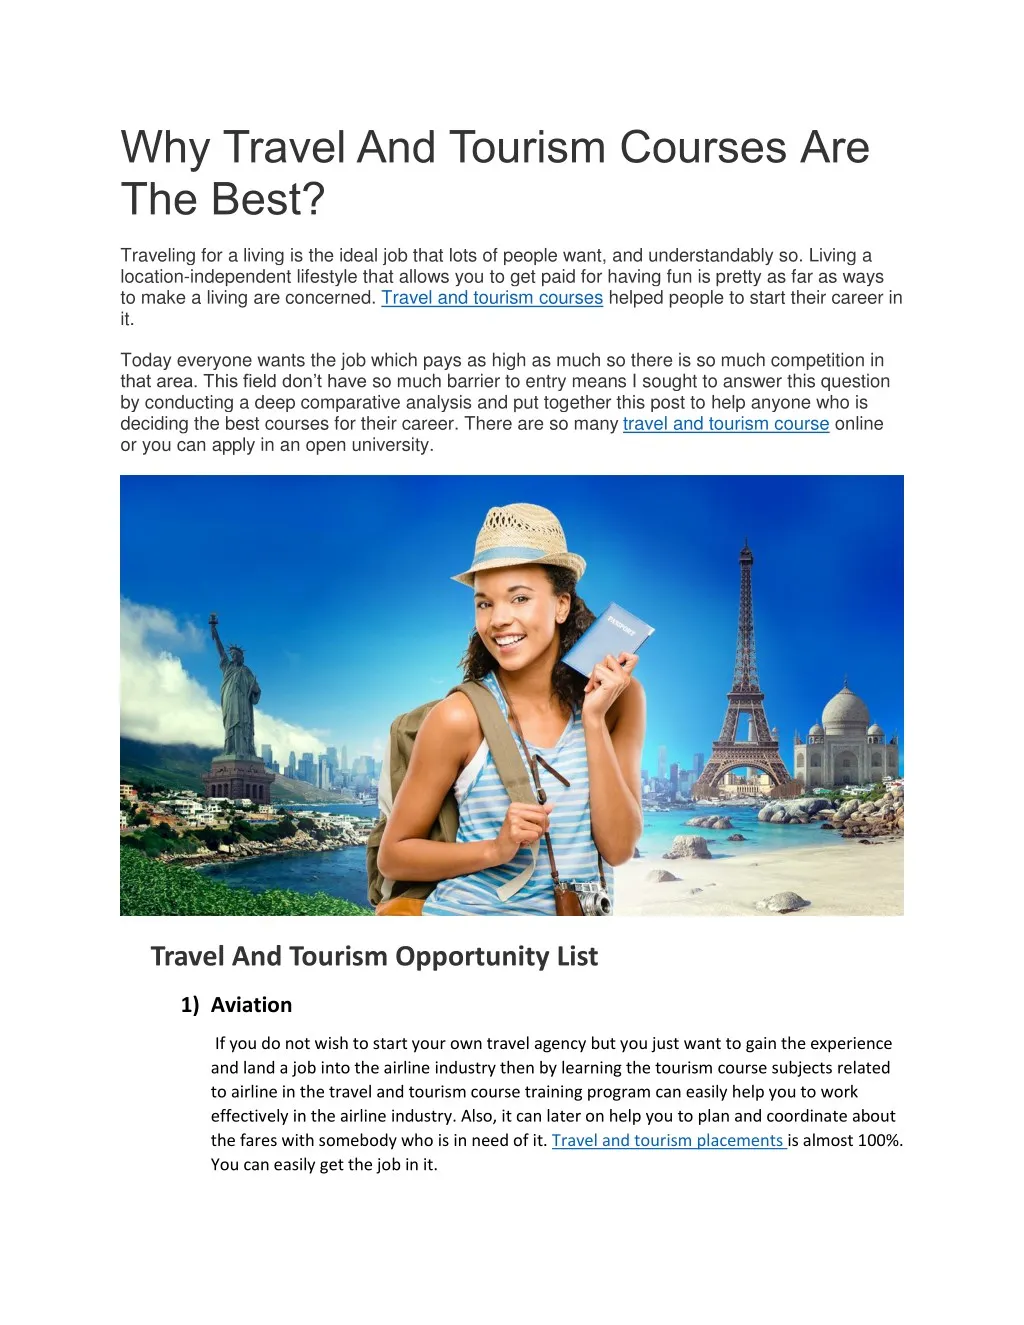 what is all about tourism course